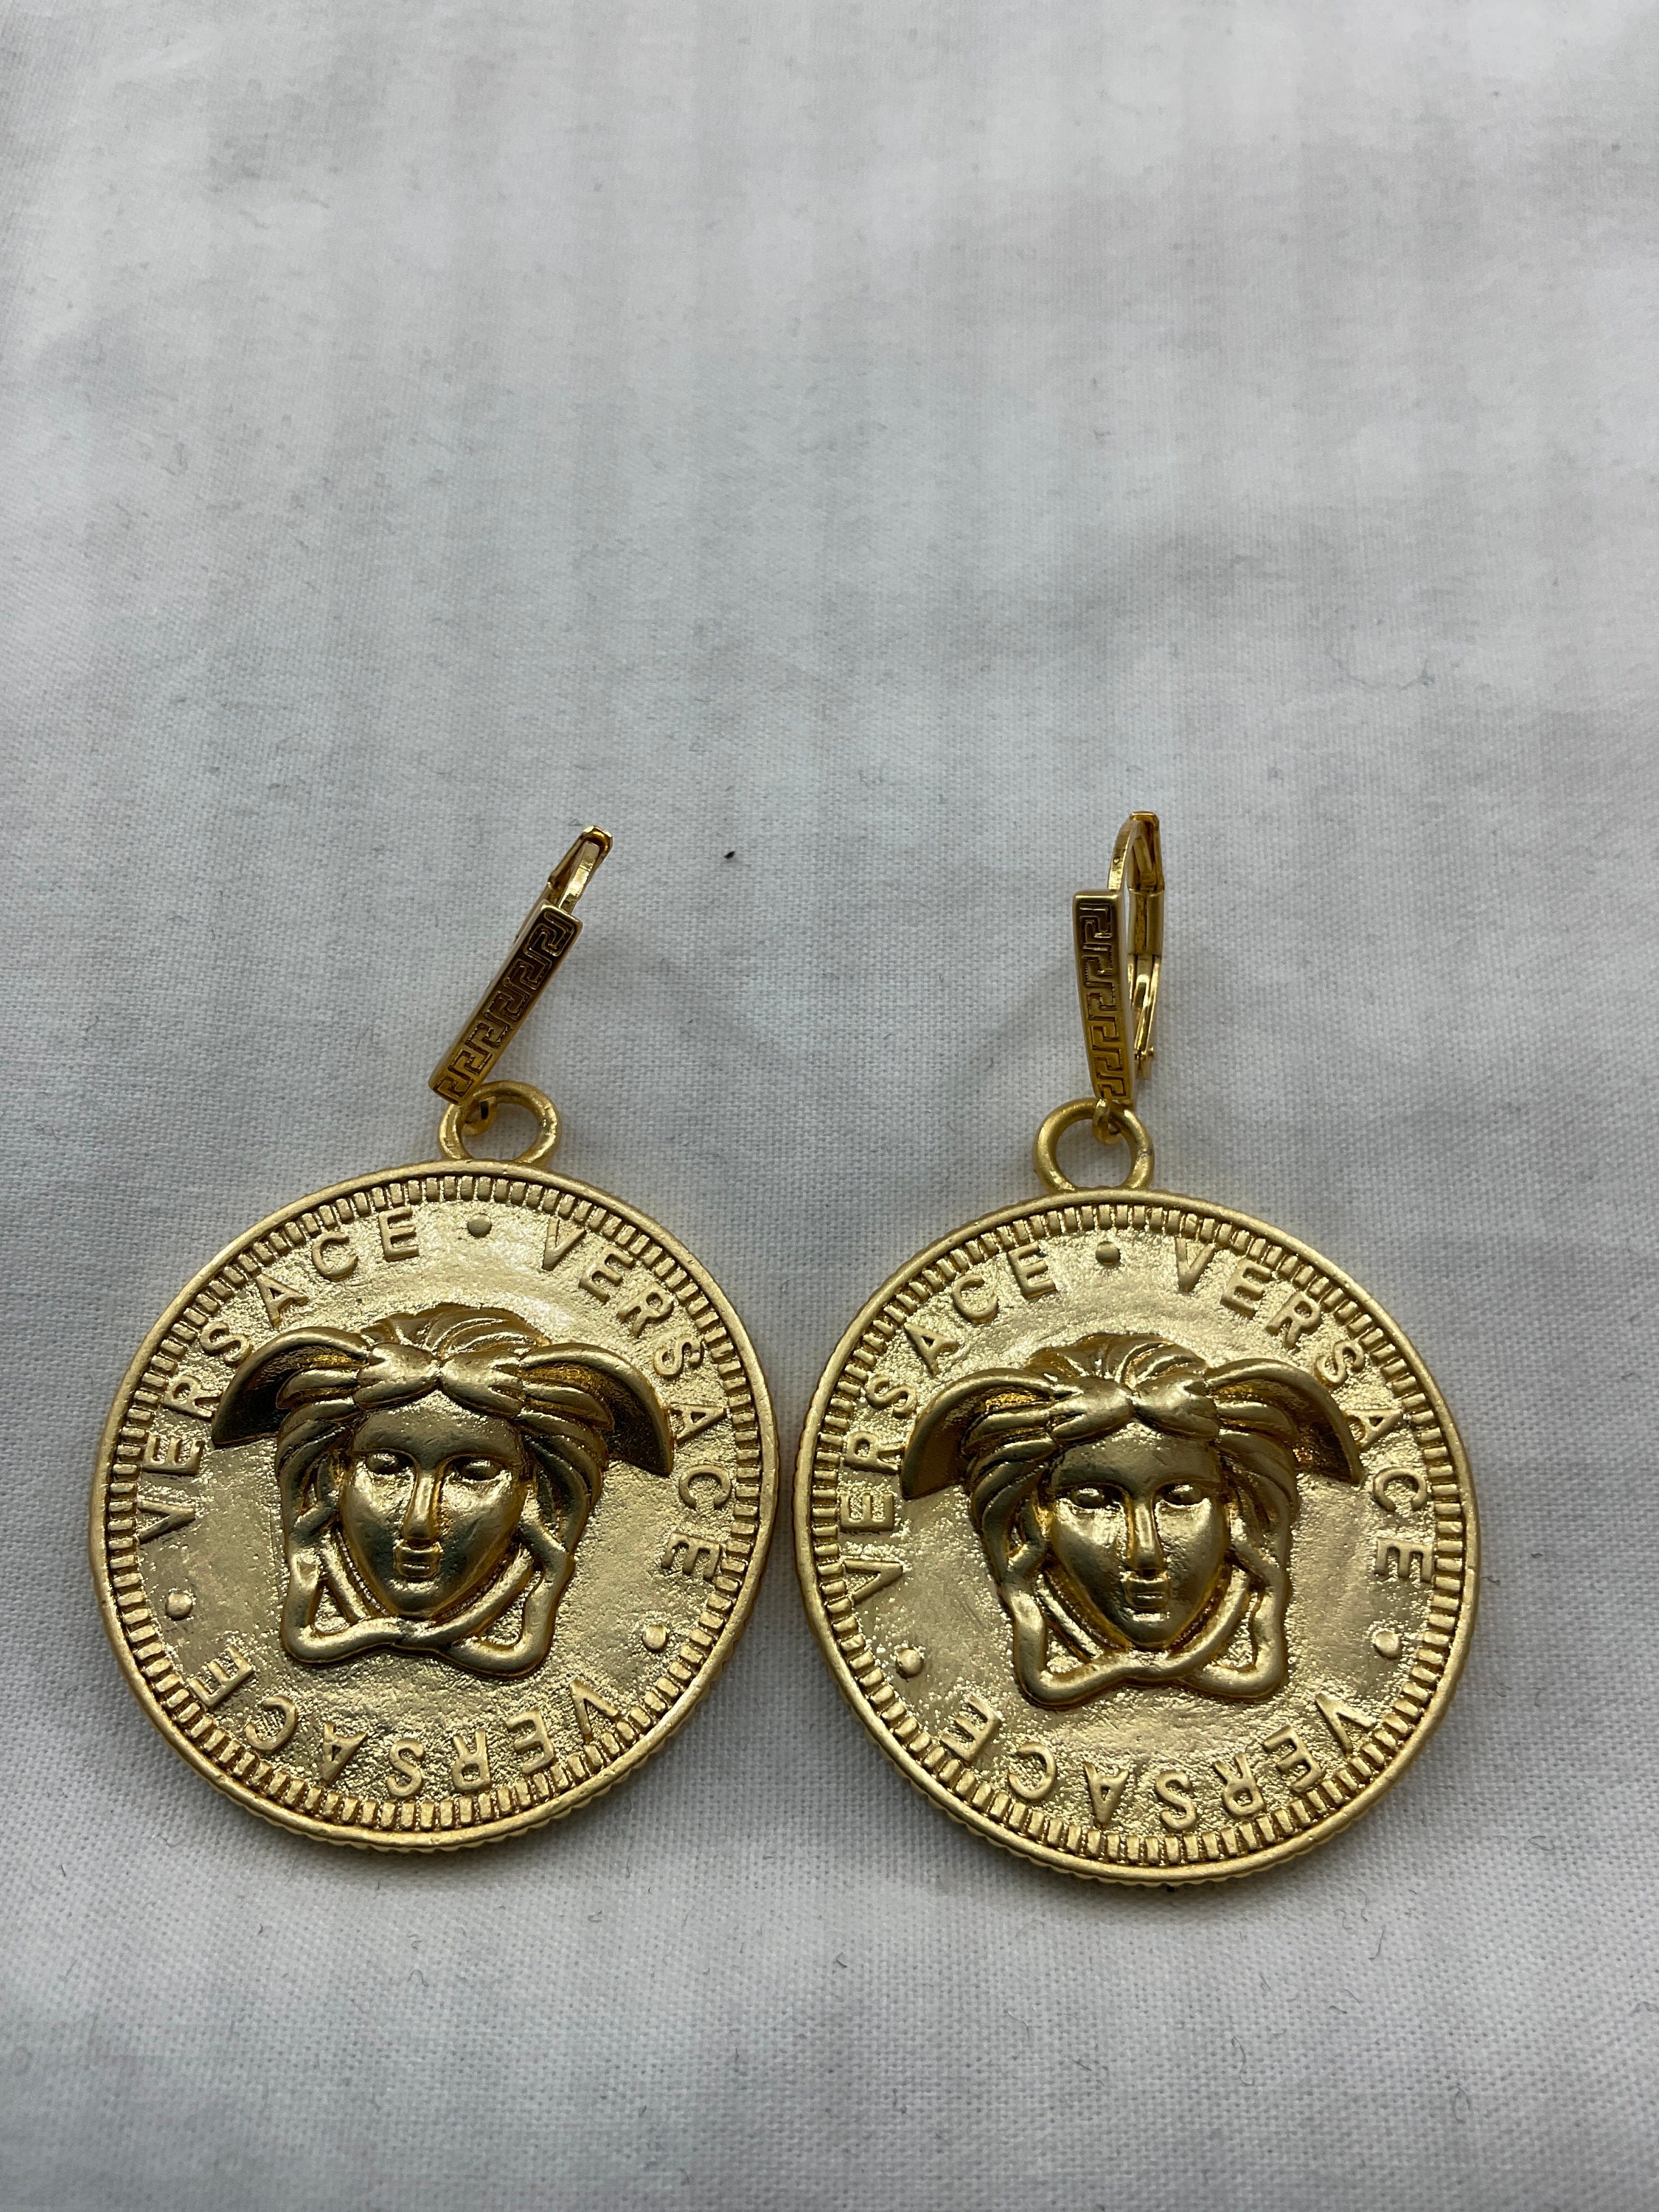 Gianni Versace - Authenticated Earrings - Gold Plated Gold for Women, Good Condition